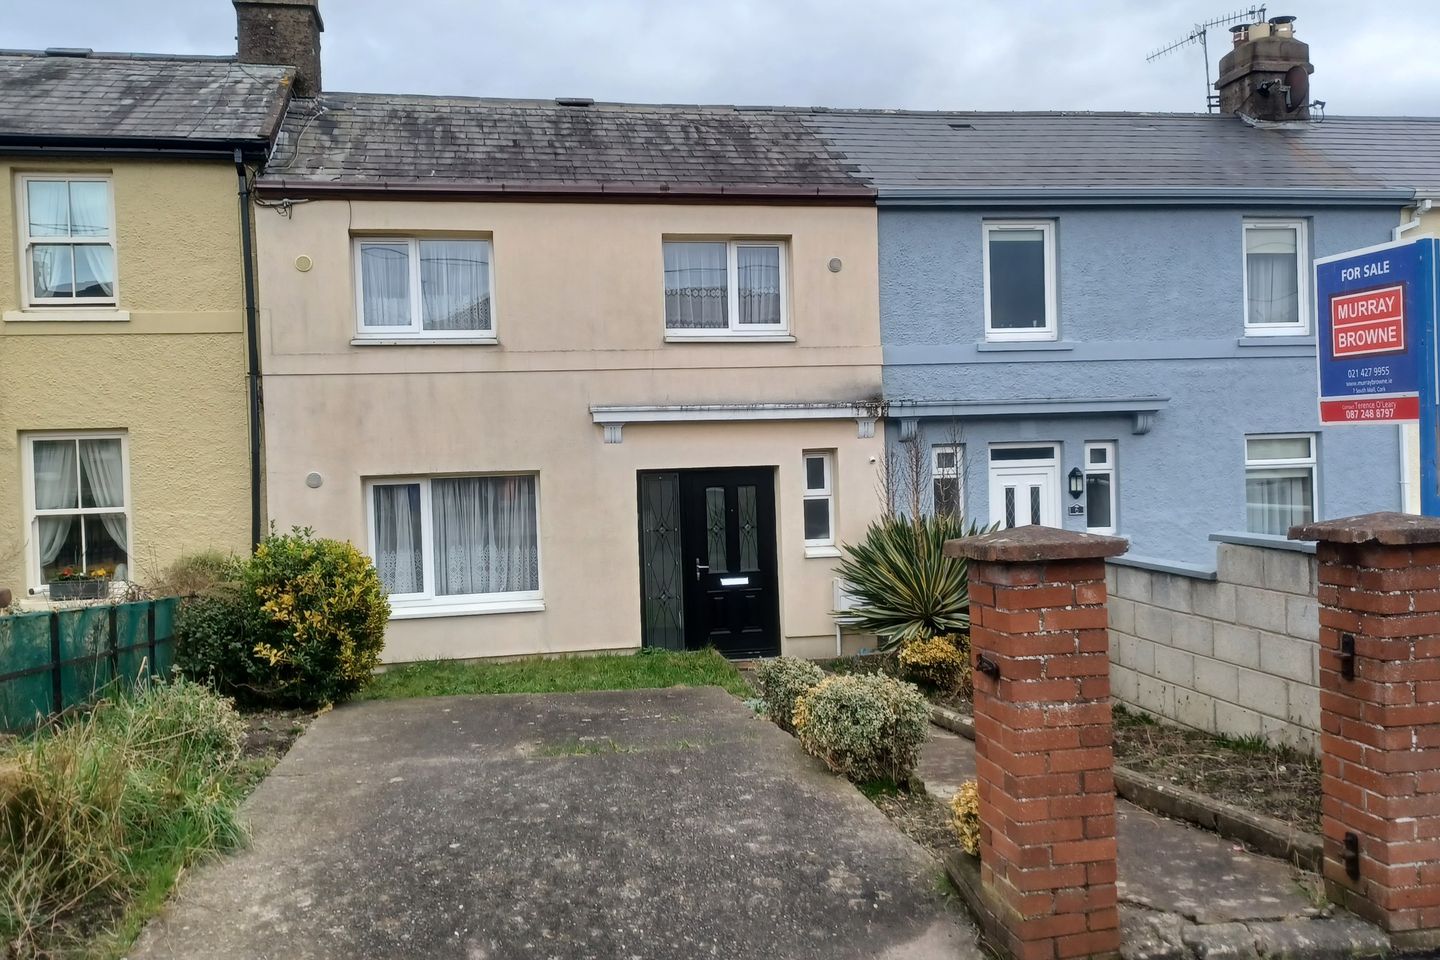 5 O'Connell Crescent, Turners Cross, Turners Cross, Co. Cork